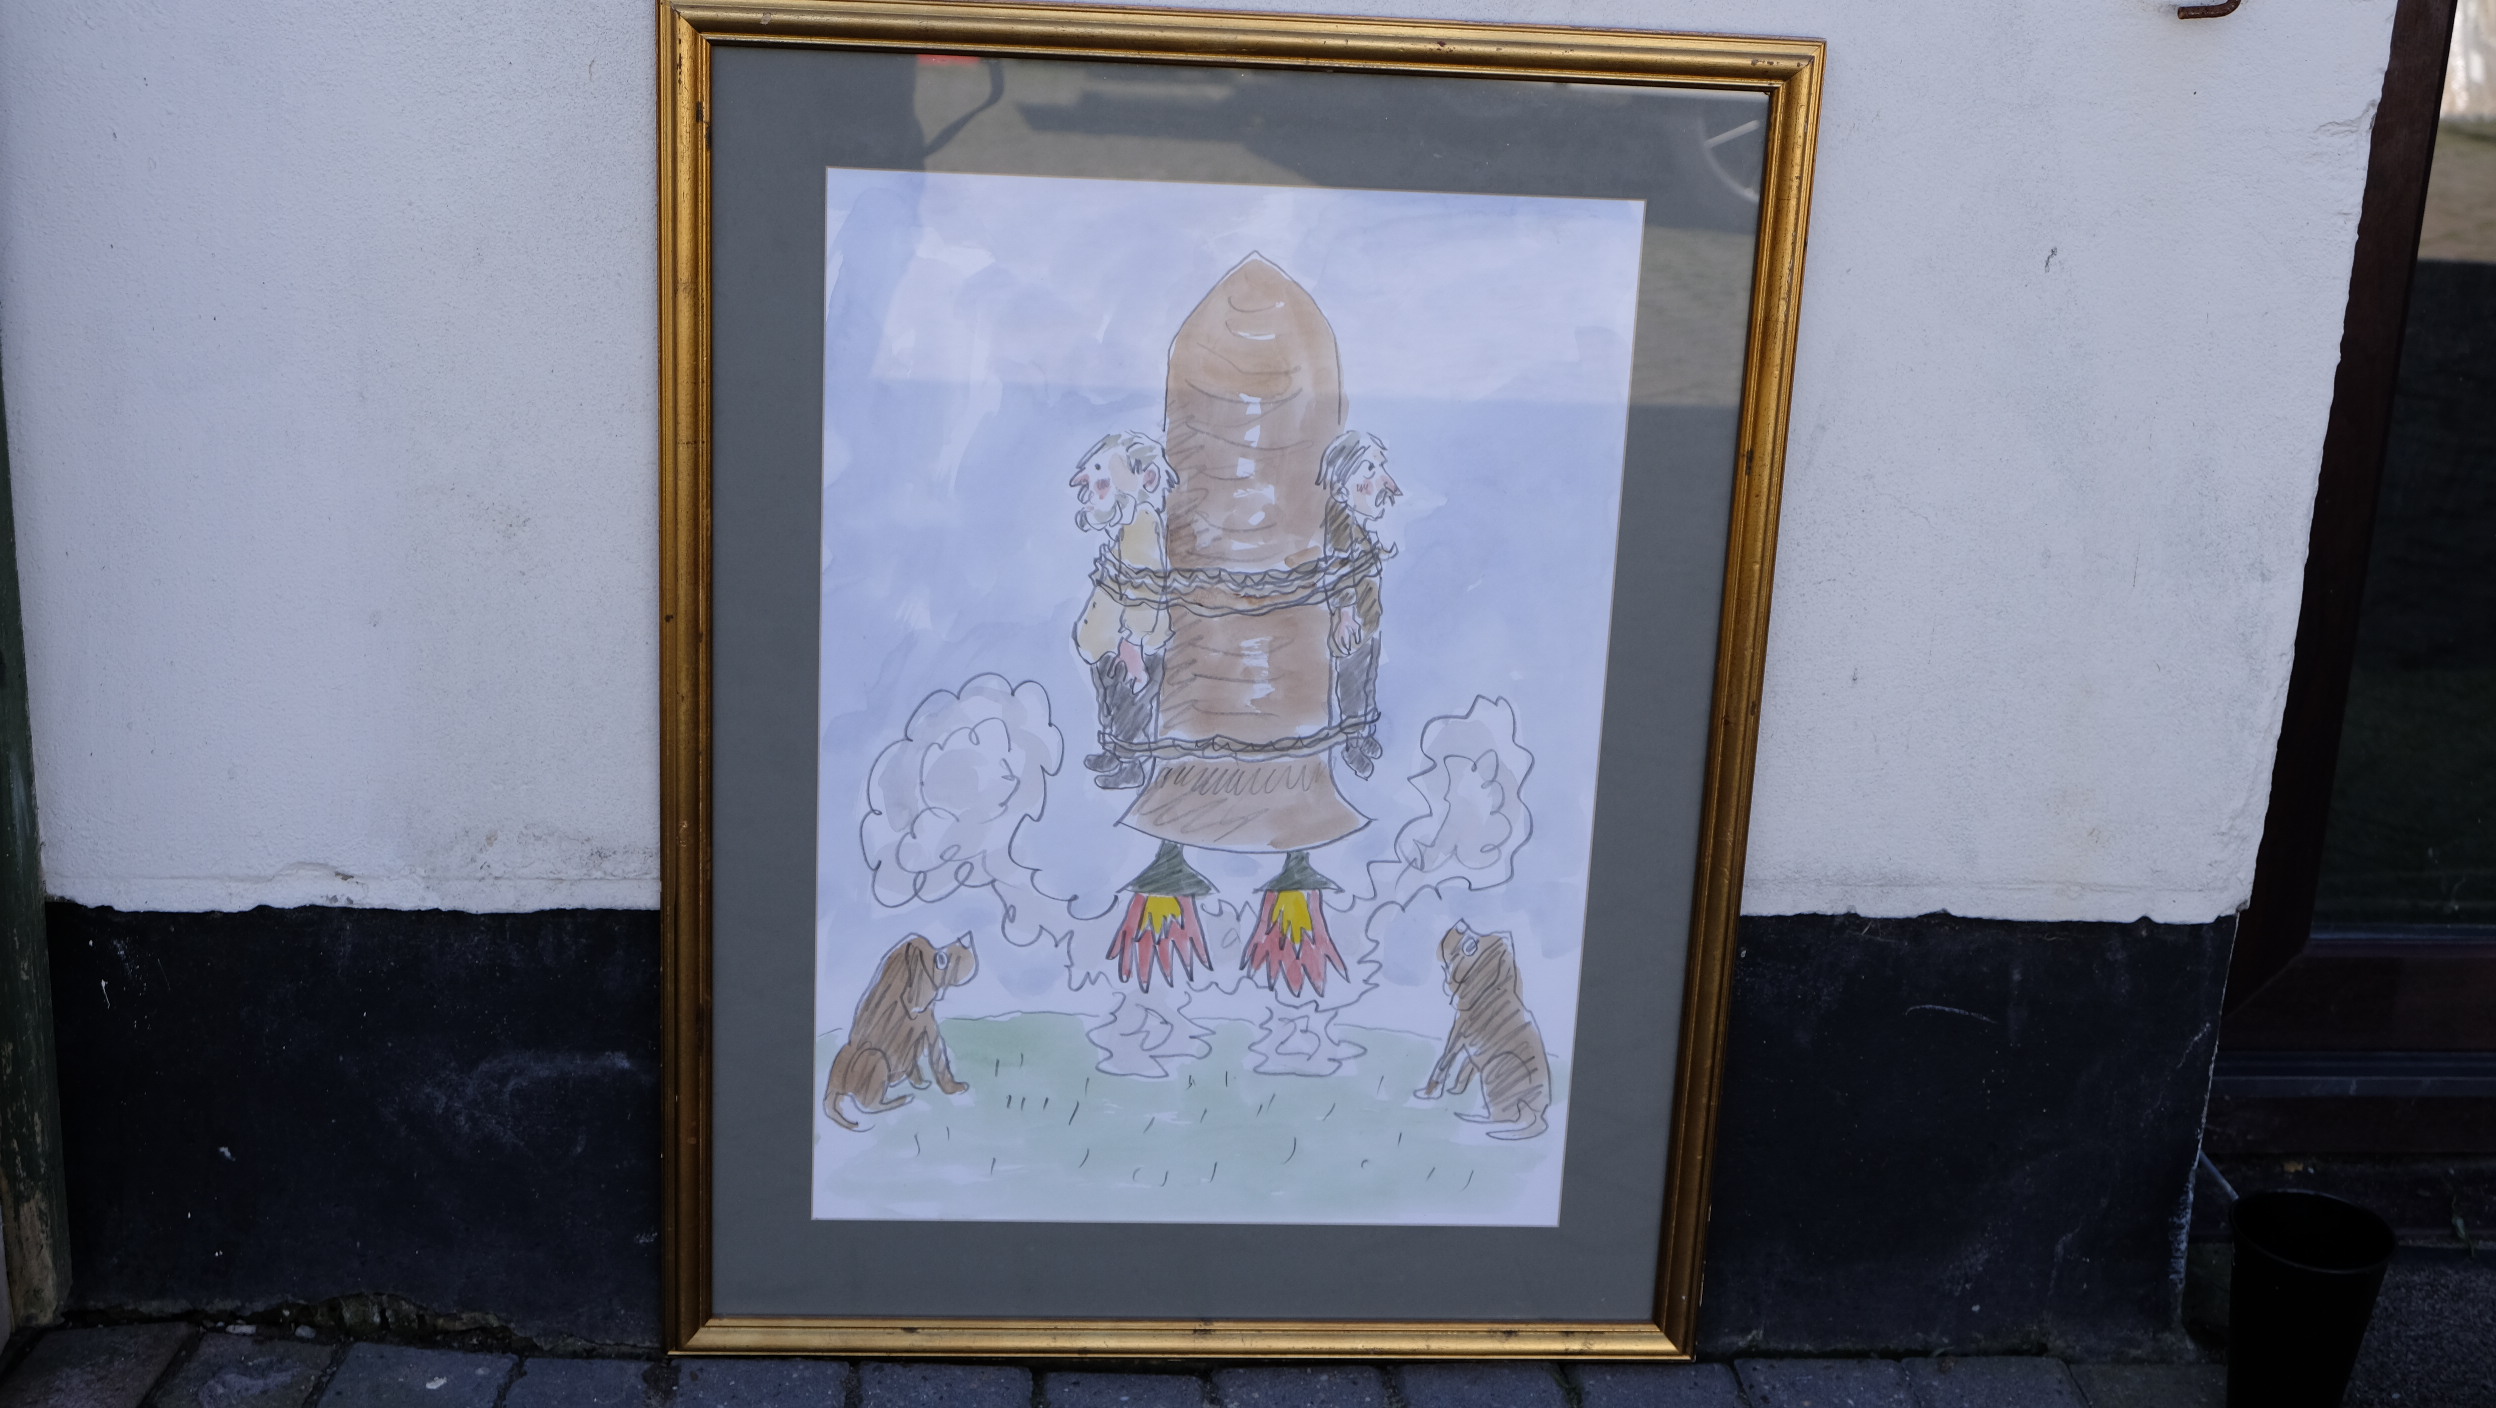 Sir Kyffin Williams - Cartoon "2 Dogs 1 Rocket", mixed media. 16" x 22". Provenance: letter